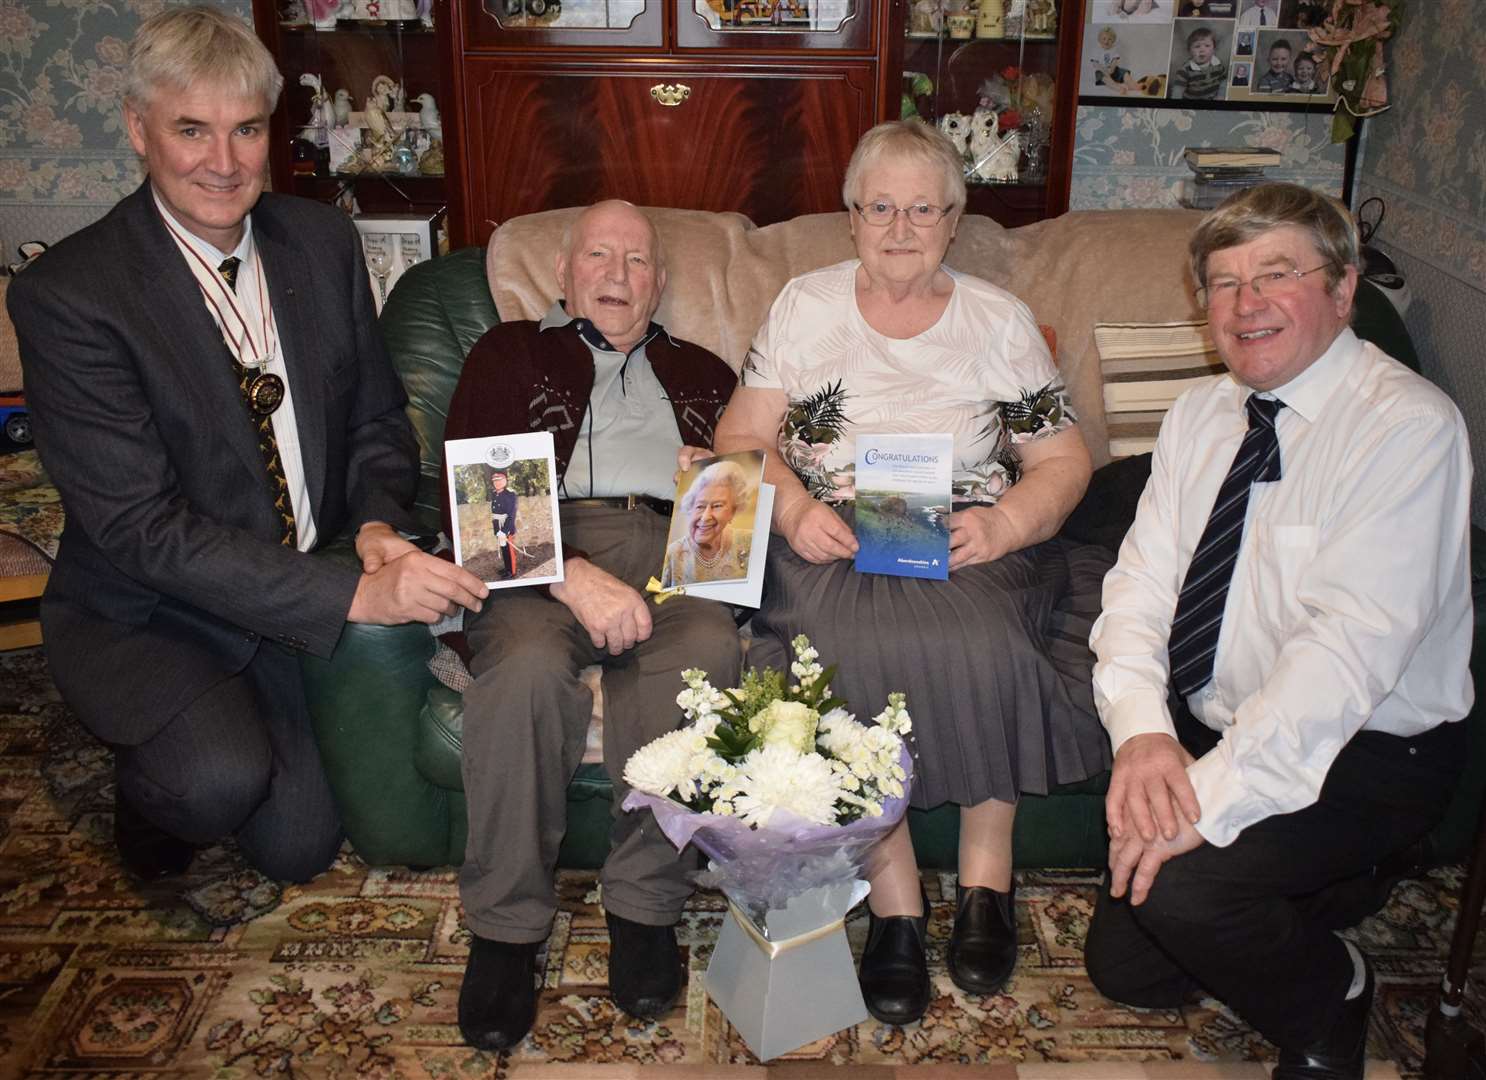 Dorothy and Herbert Matthew were visited by Deputy Lieutenant of Aberdeenshire Steven Mackison and councillor Iain Taylor on their diamond wedding anniversary.